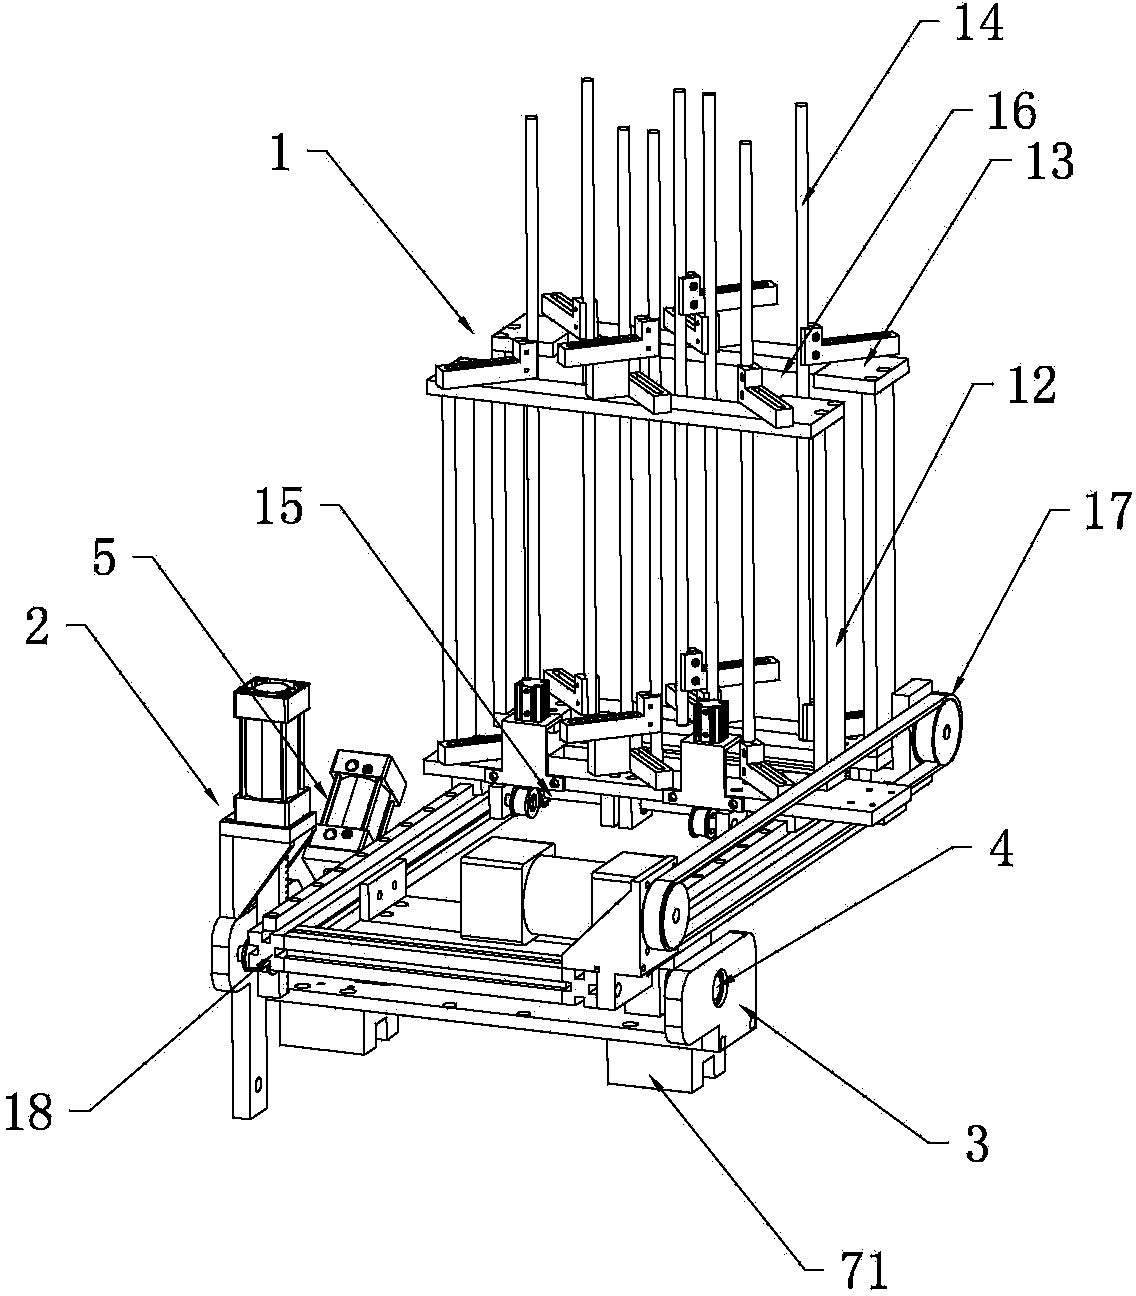 Leftward and rightward movement receiving conveying system